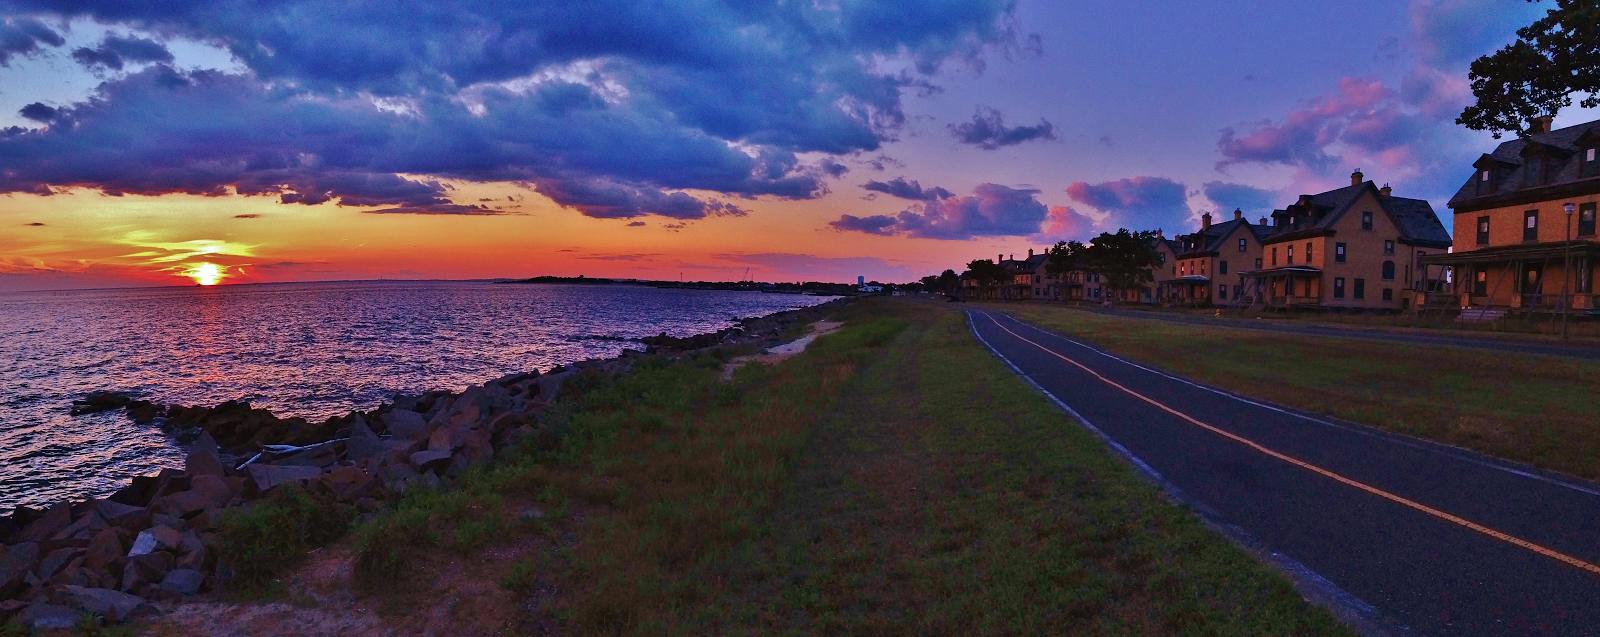 Paternoster, Michael J Officers Row  Water Sunset Winner of Gateway's 2015 Photo Contest